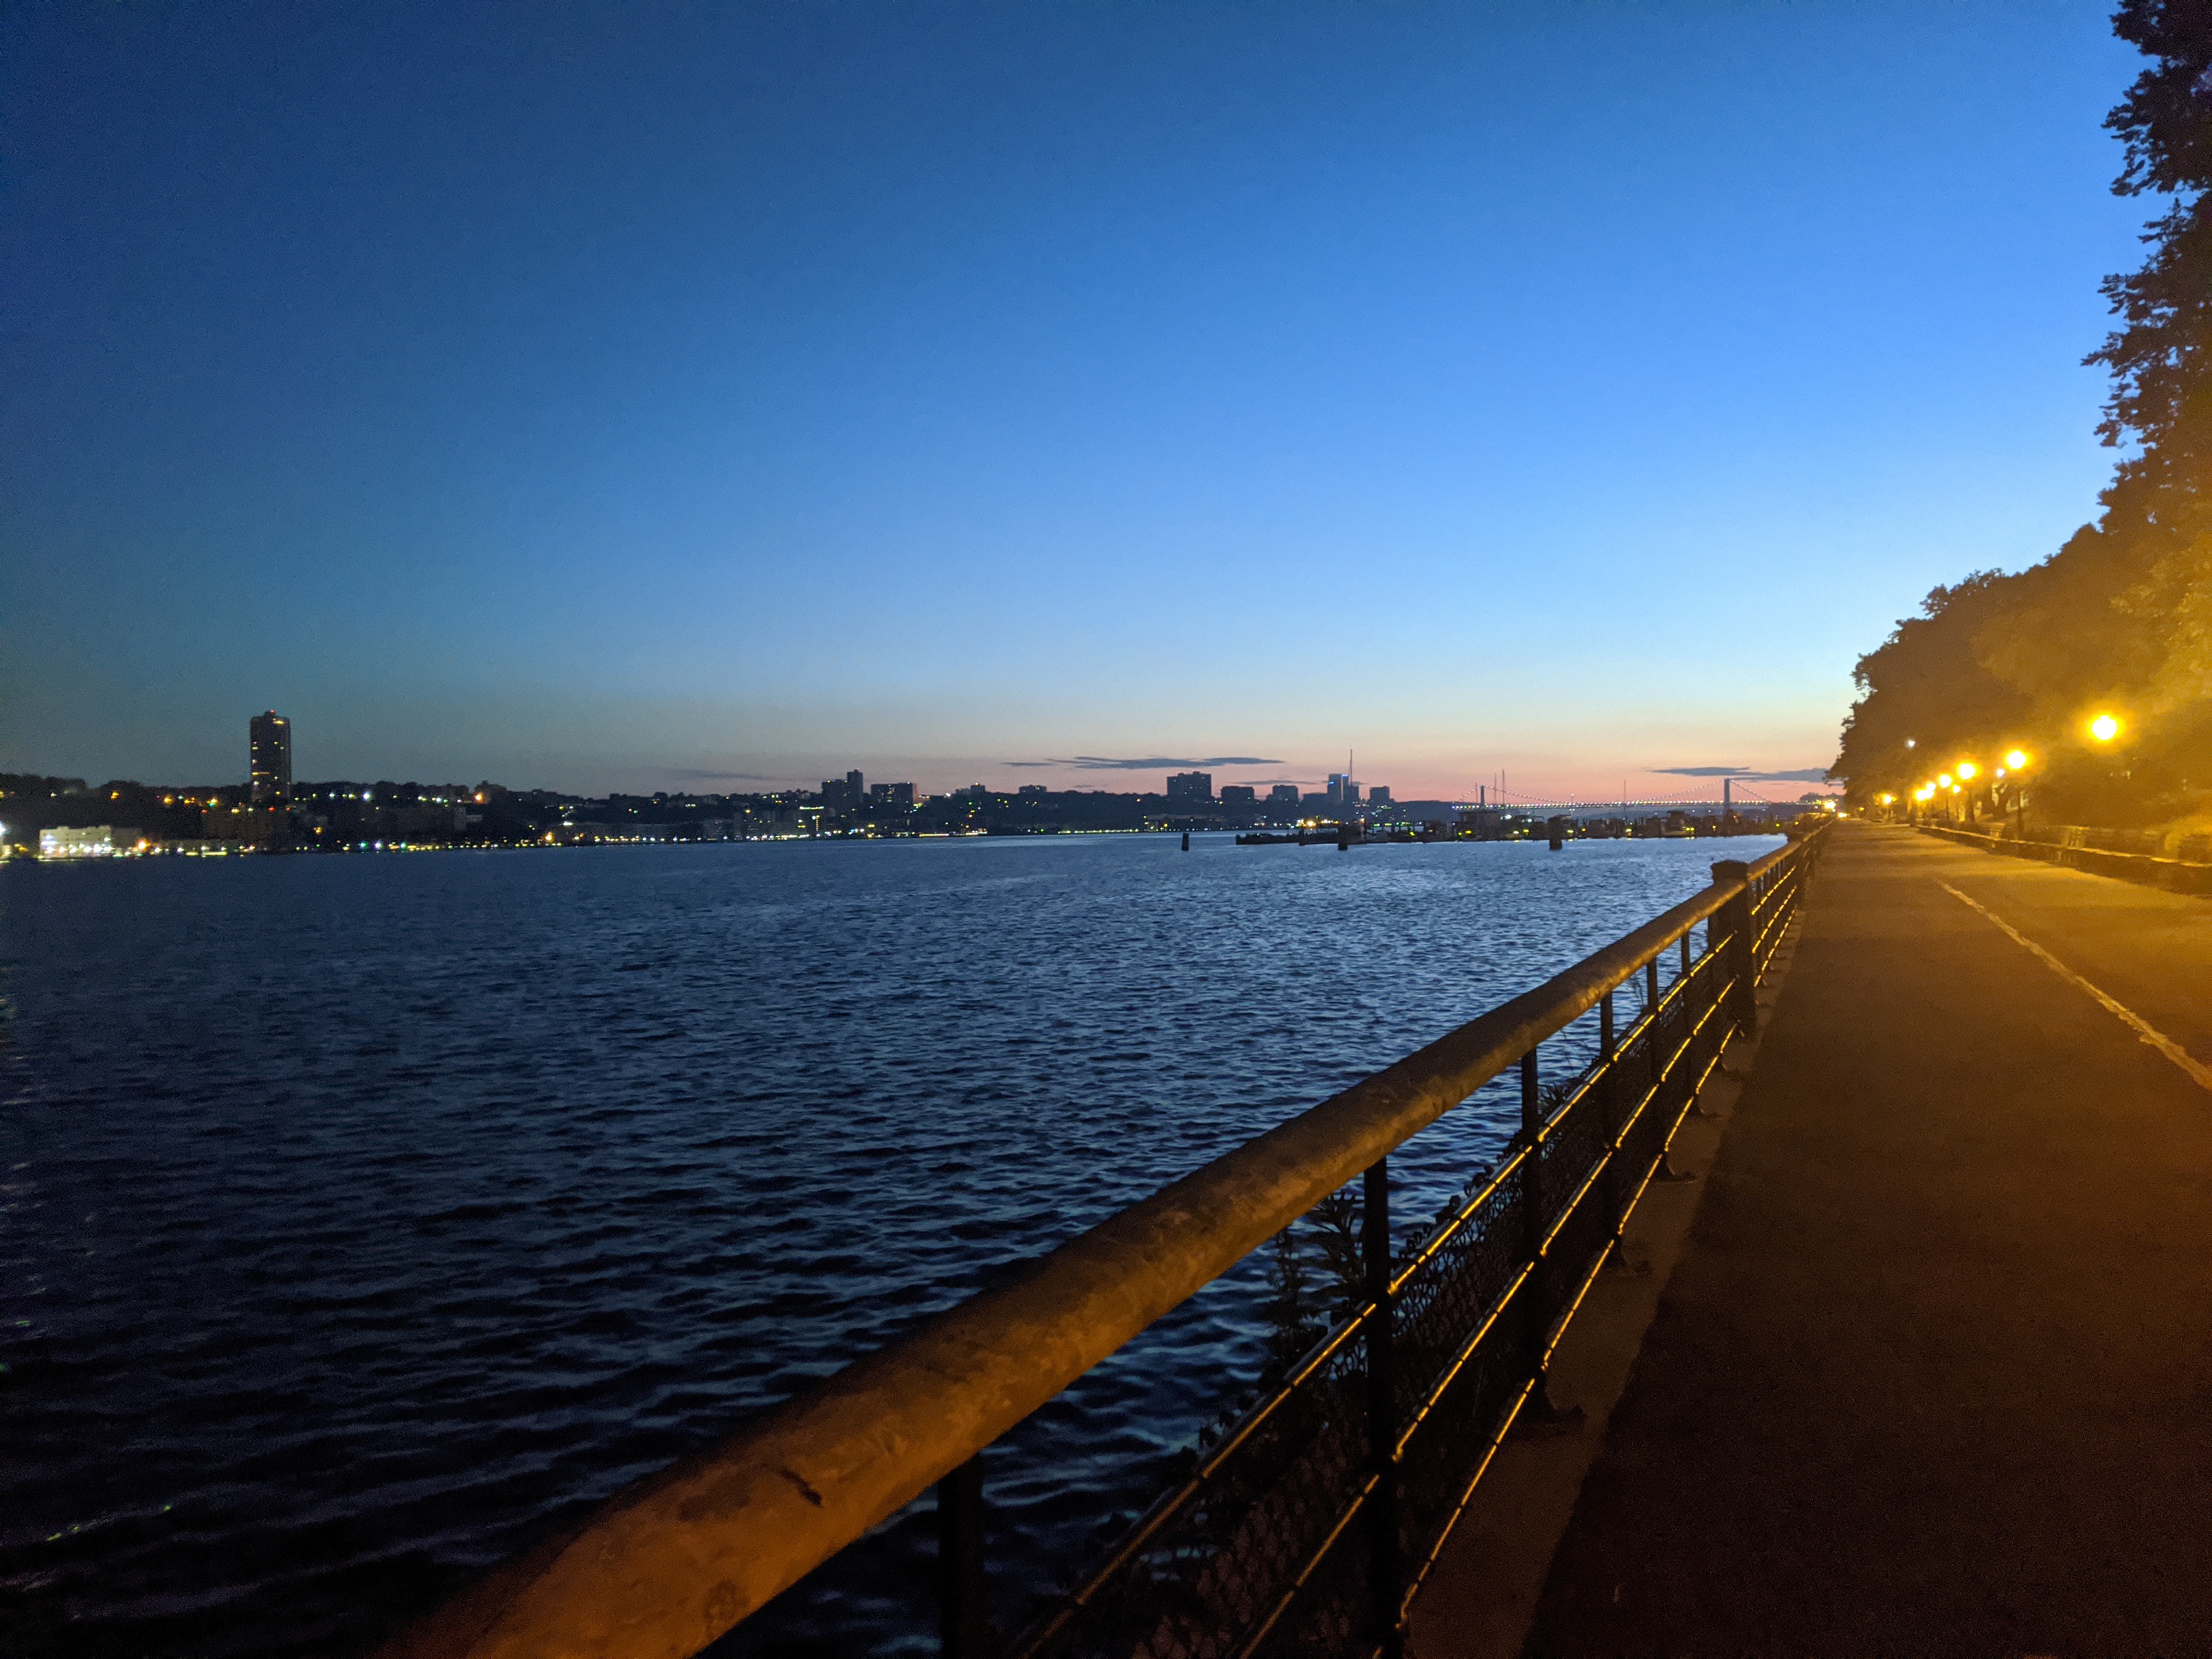 A photo of a walkway with a railing, next to a river. On the oppisite bank of the river is a city skyline. It's early in the morning, before the sun has fully risen, and streetlights provide much of the illumination in the photo.